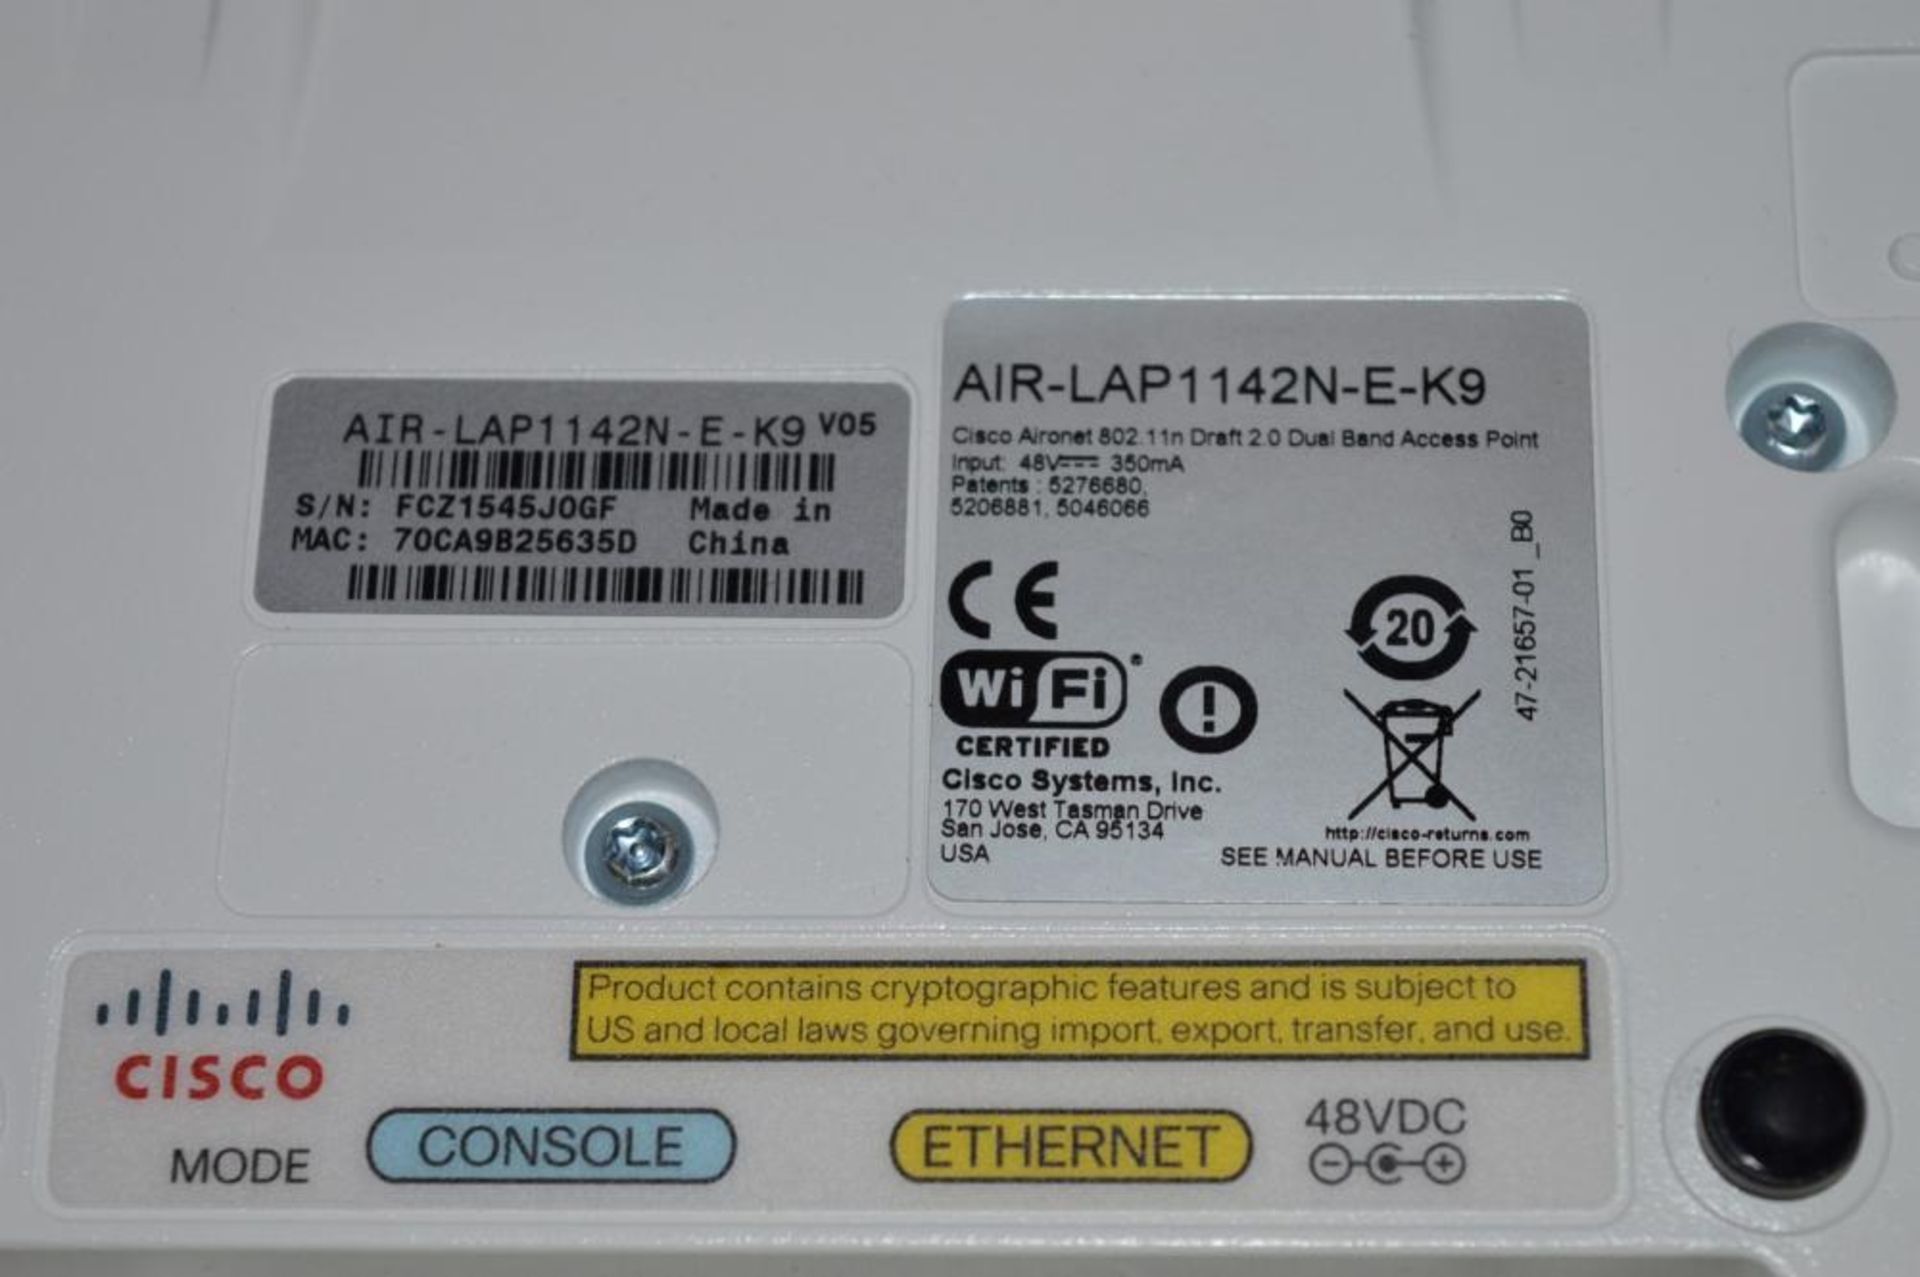 1 x Cisco AIR-LAP1142N-E-K9 Cisco AIR-LAP1142N-E-K9 Controller Based Radio Access Point Router - CL4 - Image 3 of 3